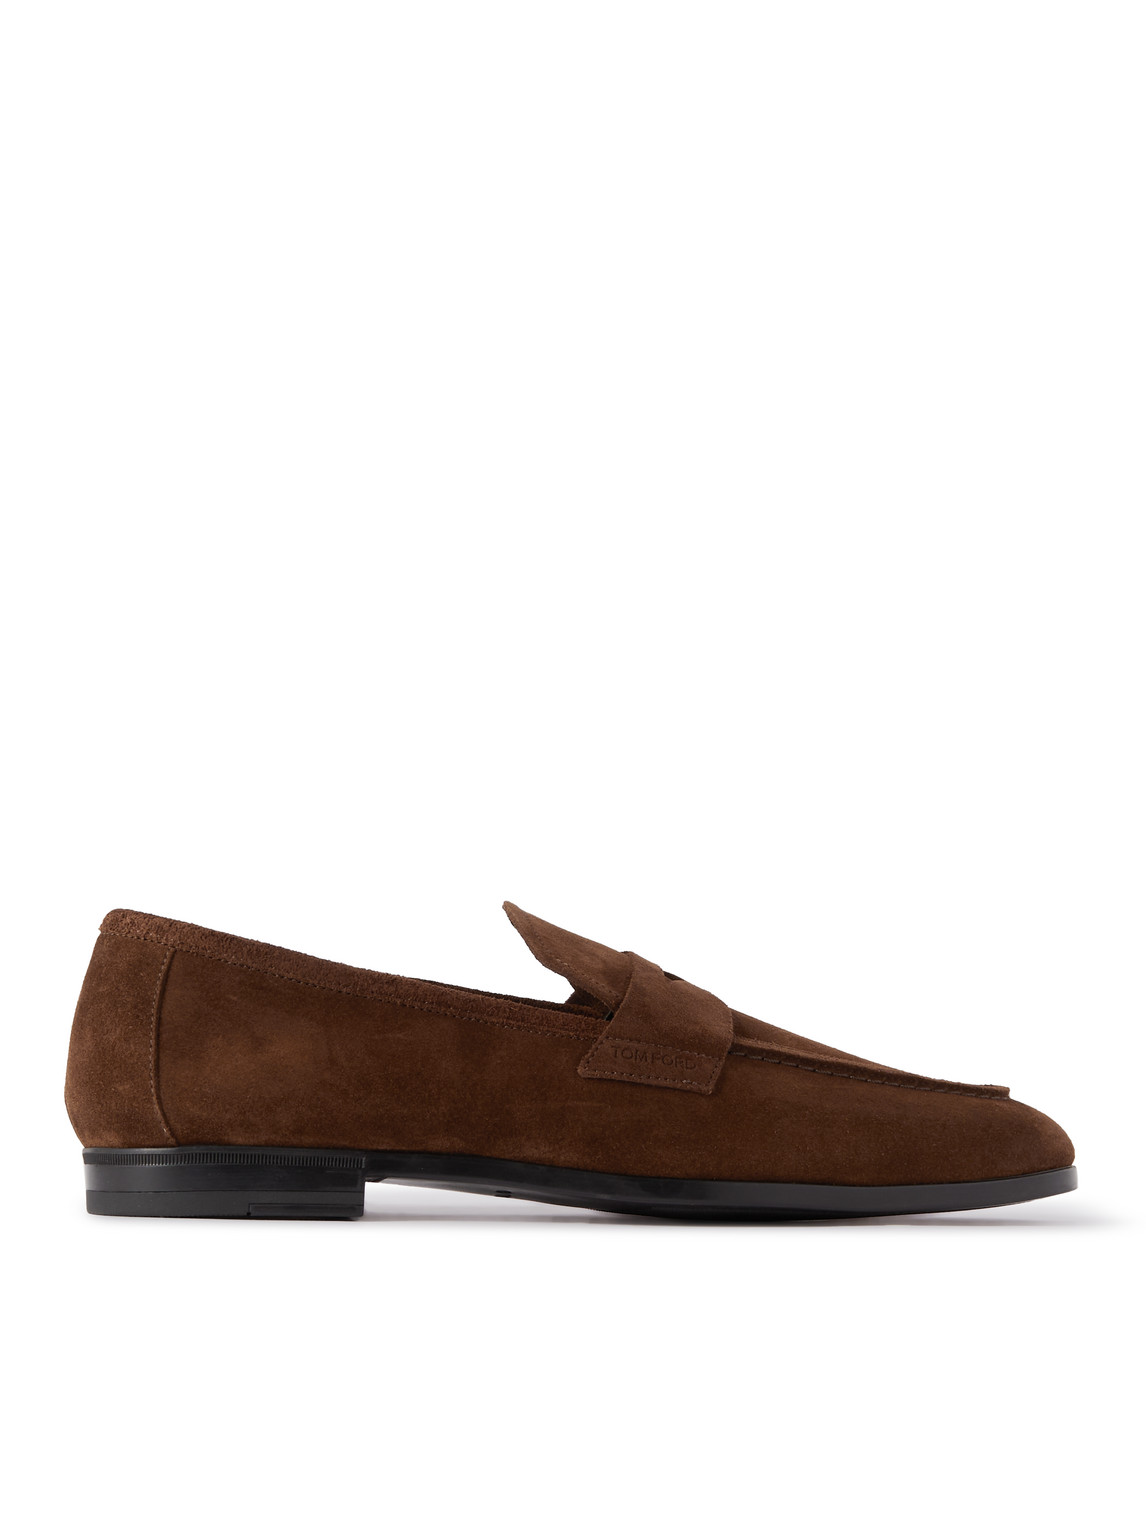 TOM FORD SUEDE LOAFERS